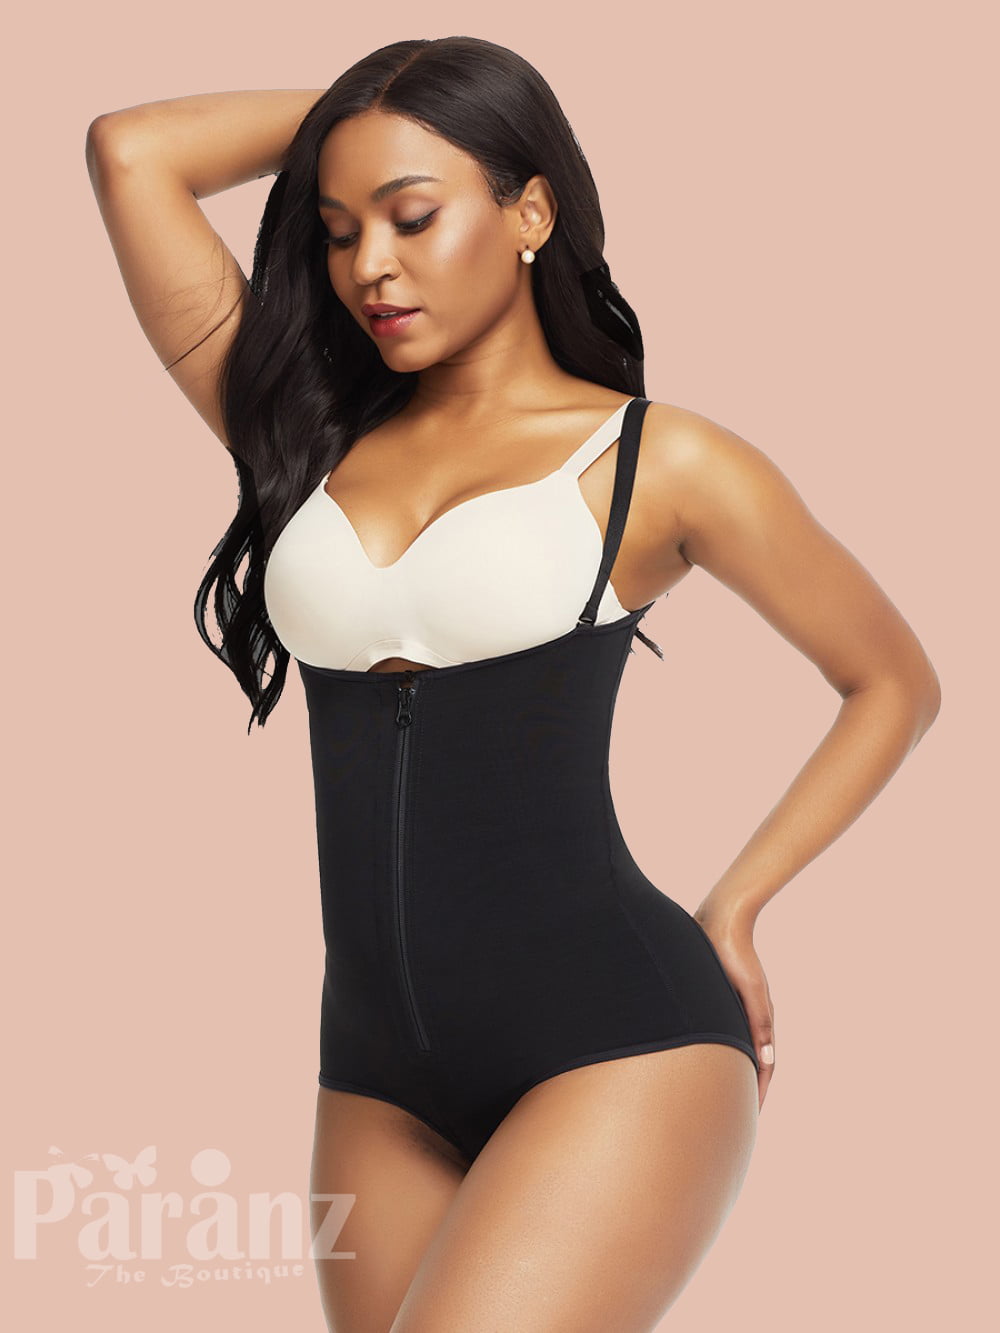 Women Playsuit Casual Body Shapewear Bodysuit Skinny Romper With Cup  Fitness Slimming Shapers Comfortable Stretch Underwear - AliExpress